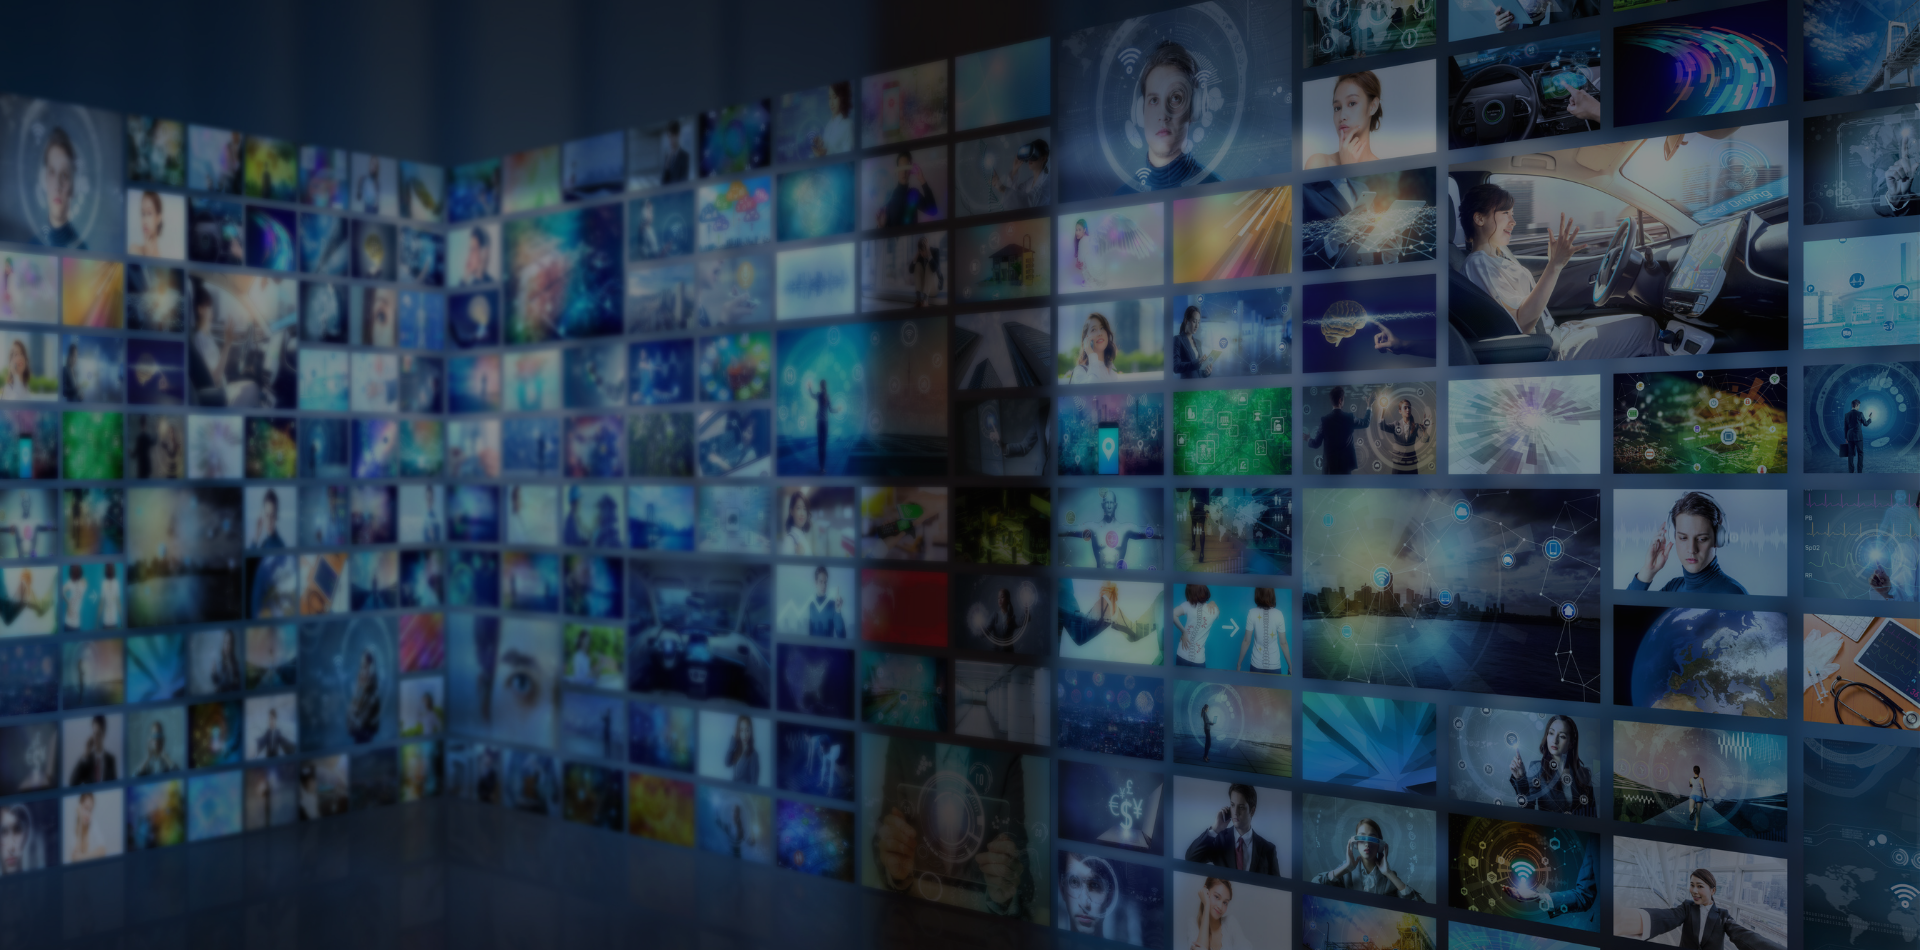 TV Advertising in Streaming Services